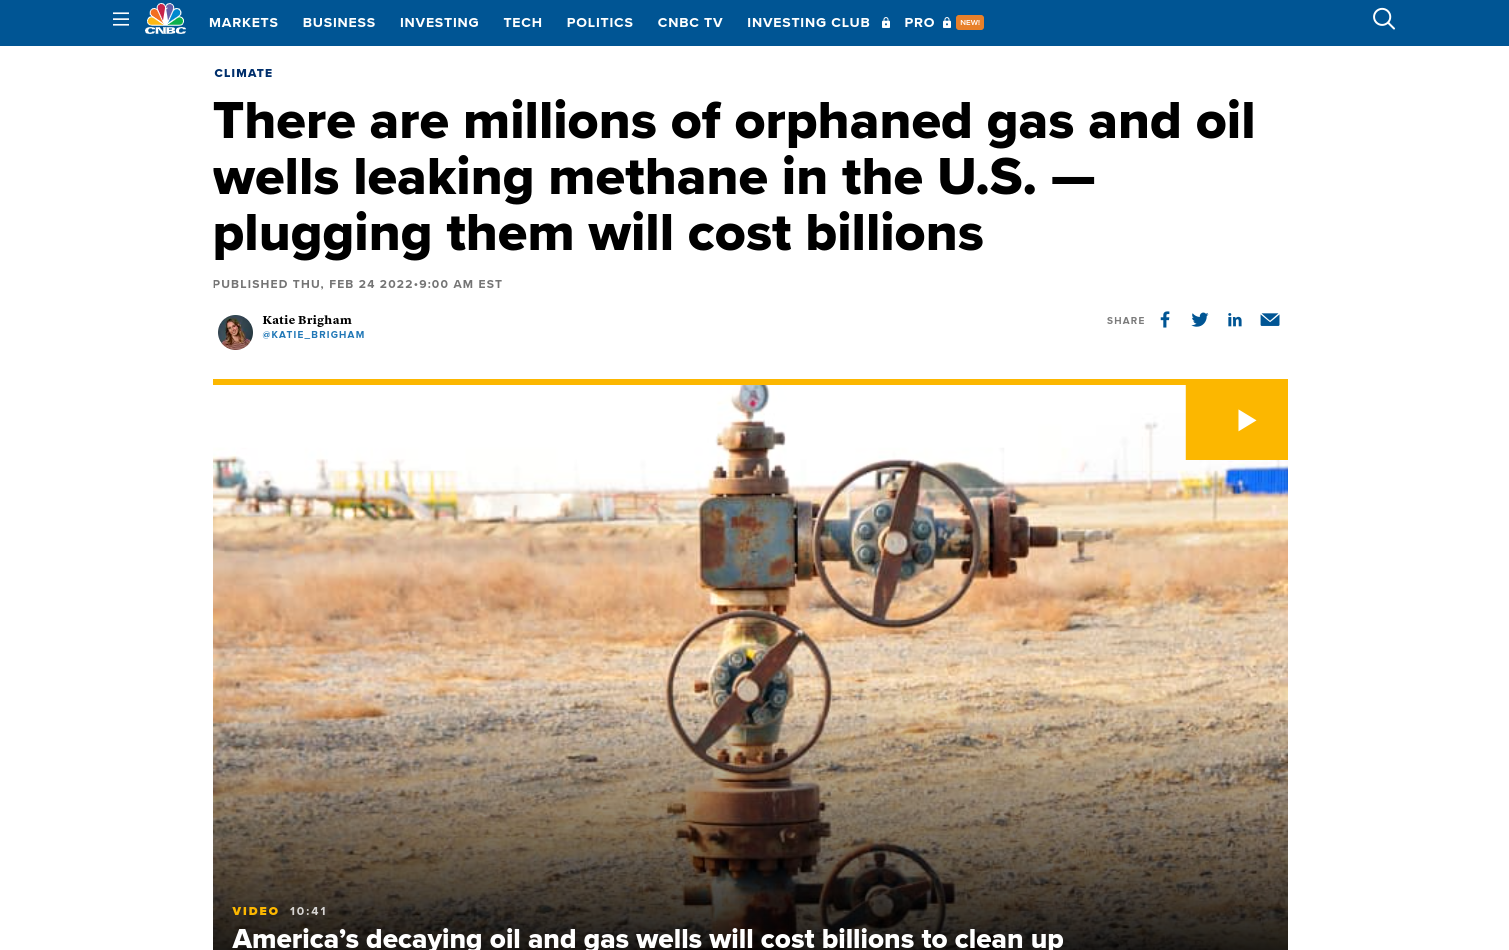 CNBC - There are millions of orphaned gas and oil wells leaking methane in the U.S. — plugging them will cost billions (February 24, 2022)